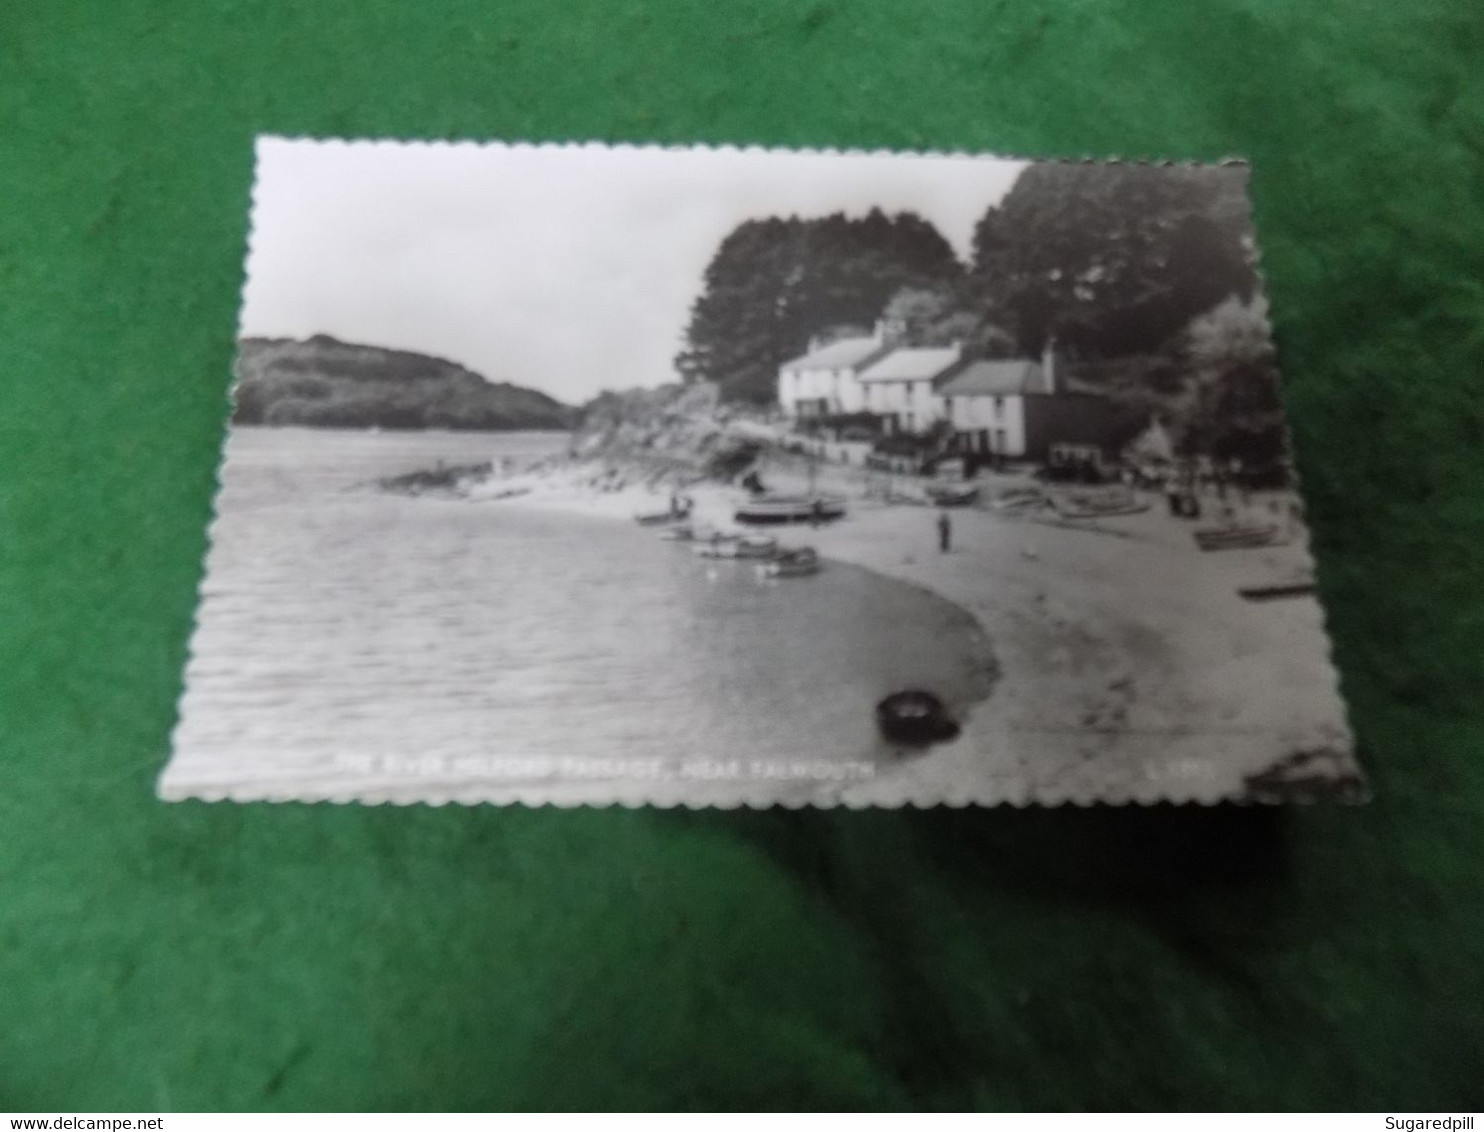 VINTAGE CORNWALL: Falmouth River Helford Passage B&w Valentine - Falmouth